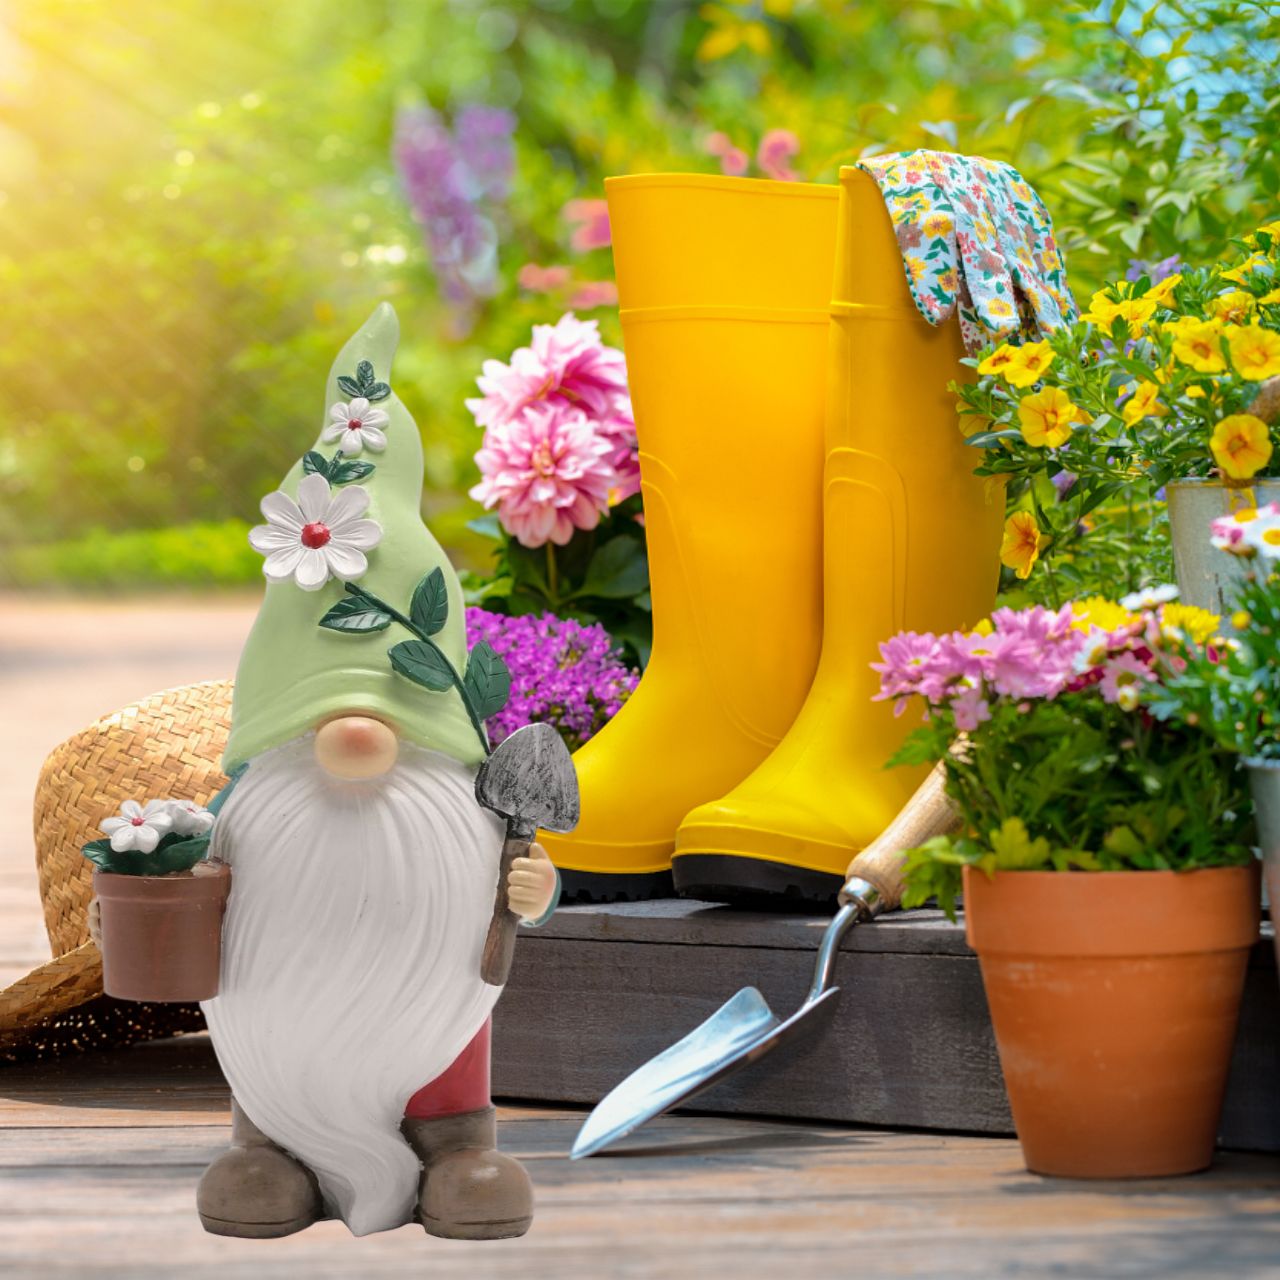 This fun-filled decoration will raise smiles and add character to gardens.  The hand painted resin garden decoration depicts a loveable gonk carrying their trowel and flowerpot. It showcases beautiful colouring throughout and offers versatile display options around the garden.